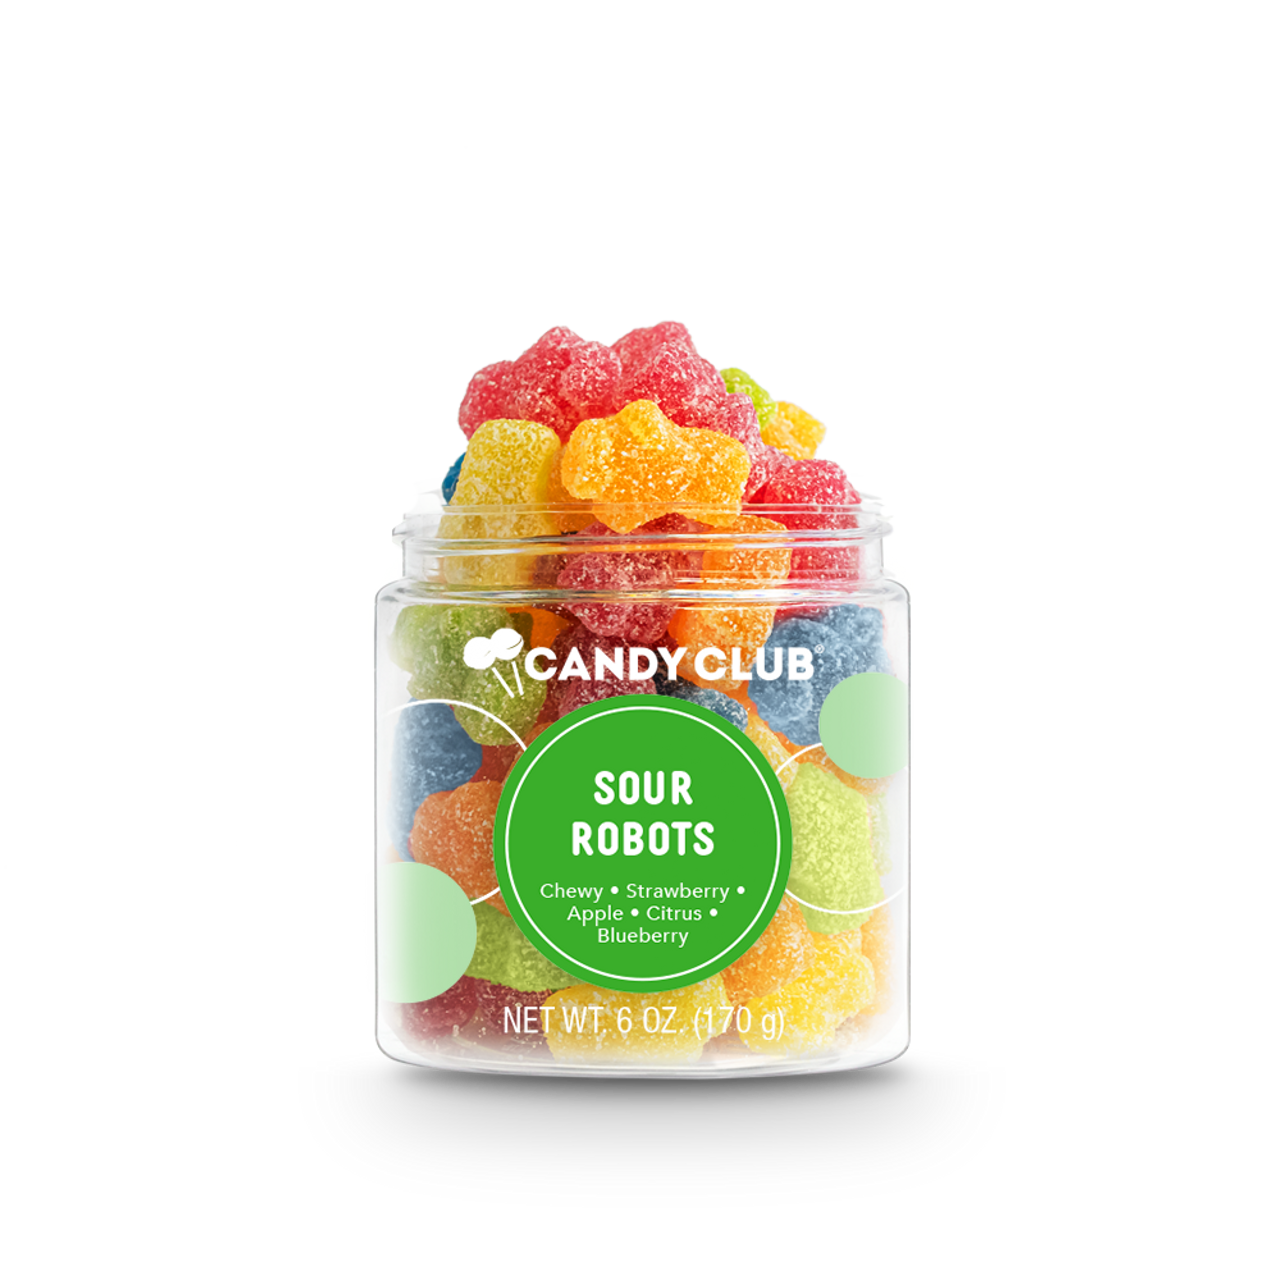 Sour Robots - Retail Swag candy